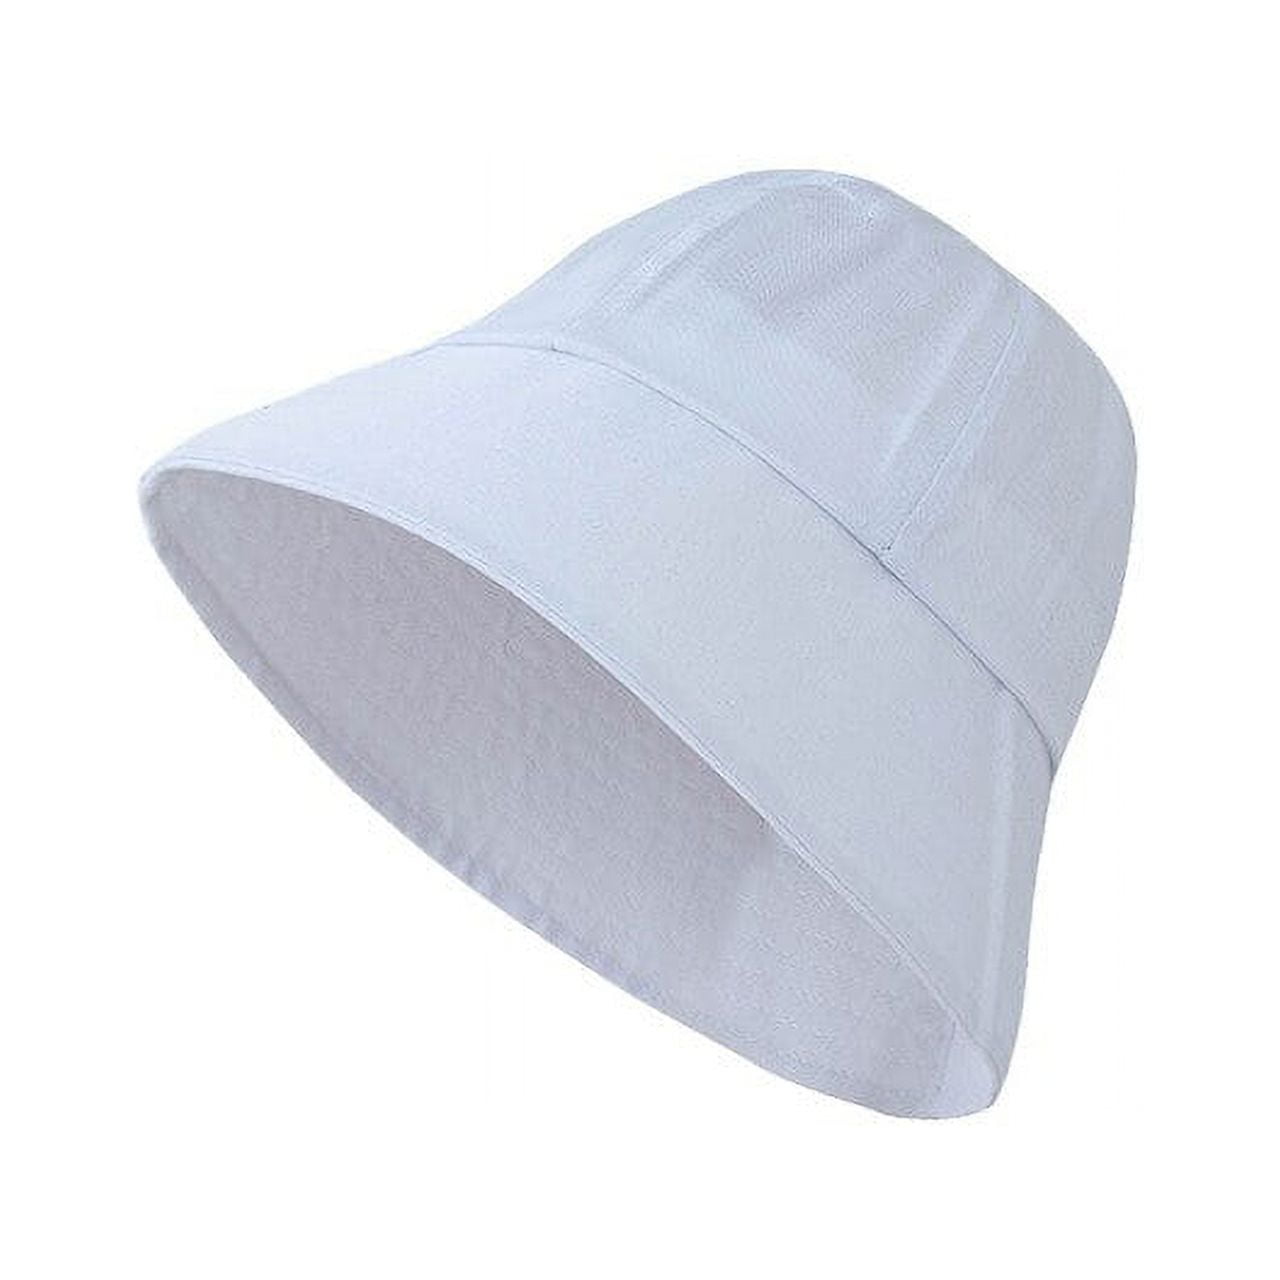 Sun Hat for Men,Cotton Embroidery Summer Outdoor Sun Protection Fishing Cap  Wide Brim Bucket Hat Foldable Safari Boonie Hat price in UAE,  UAE